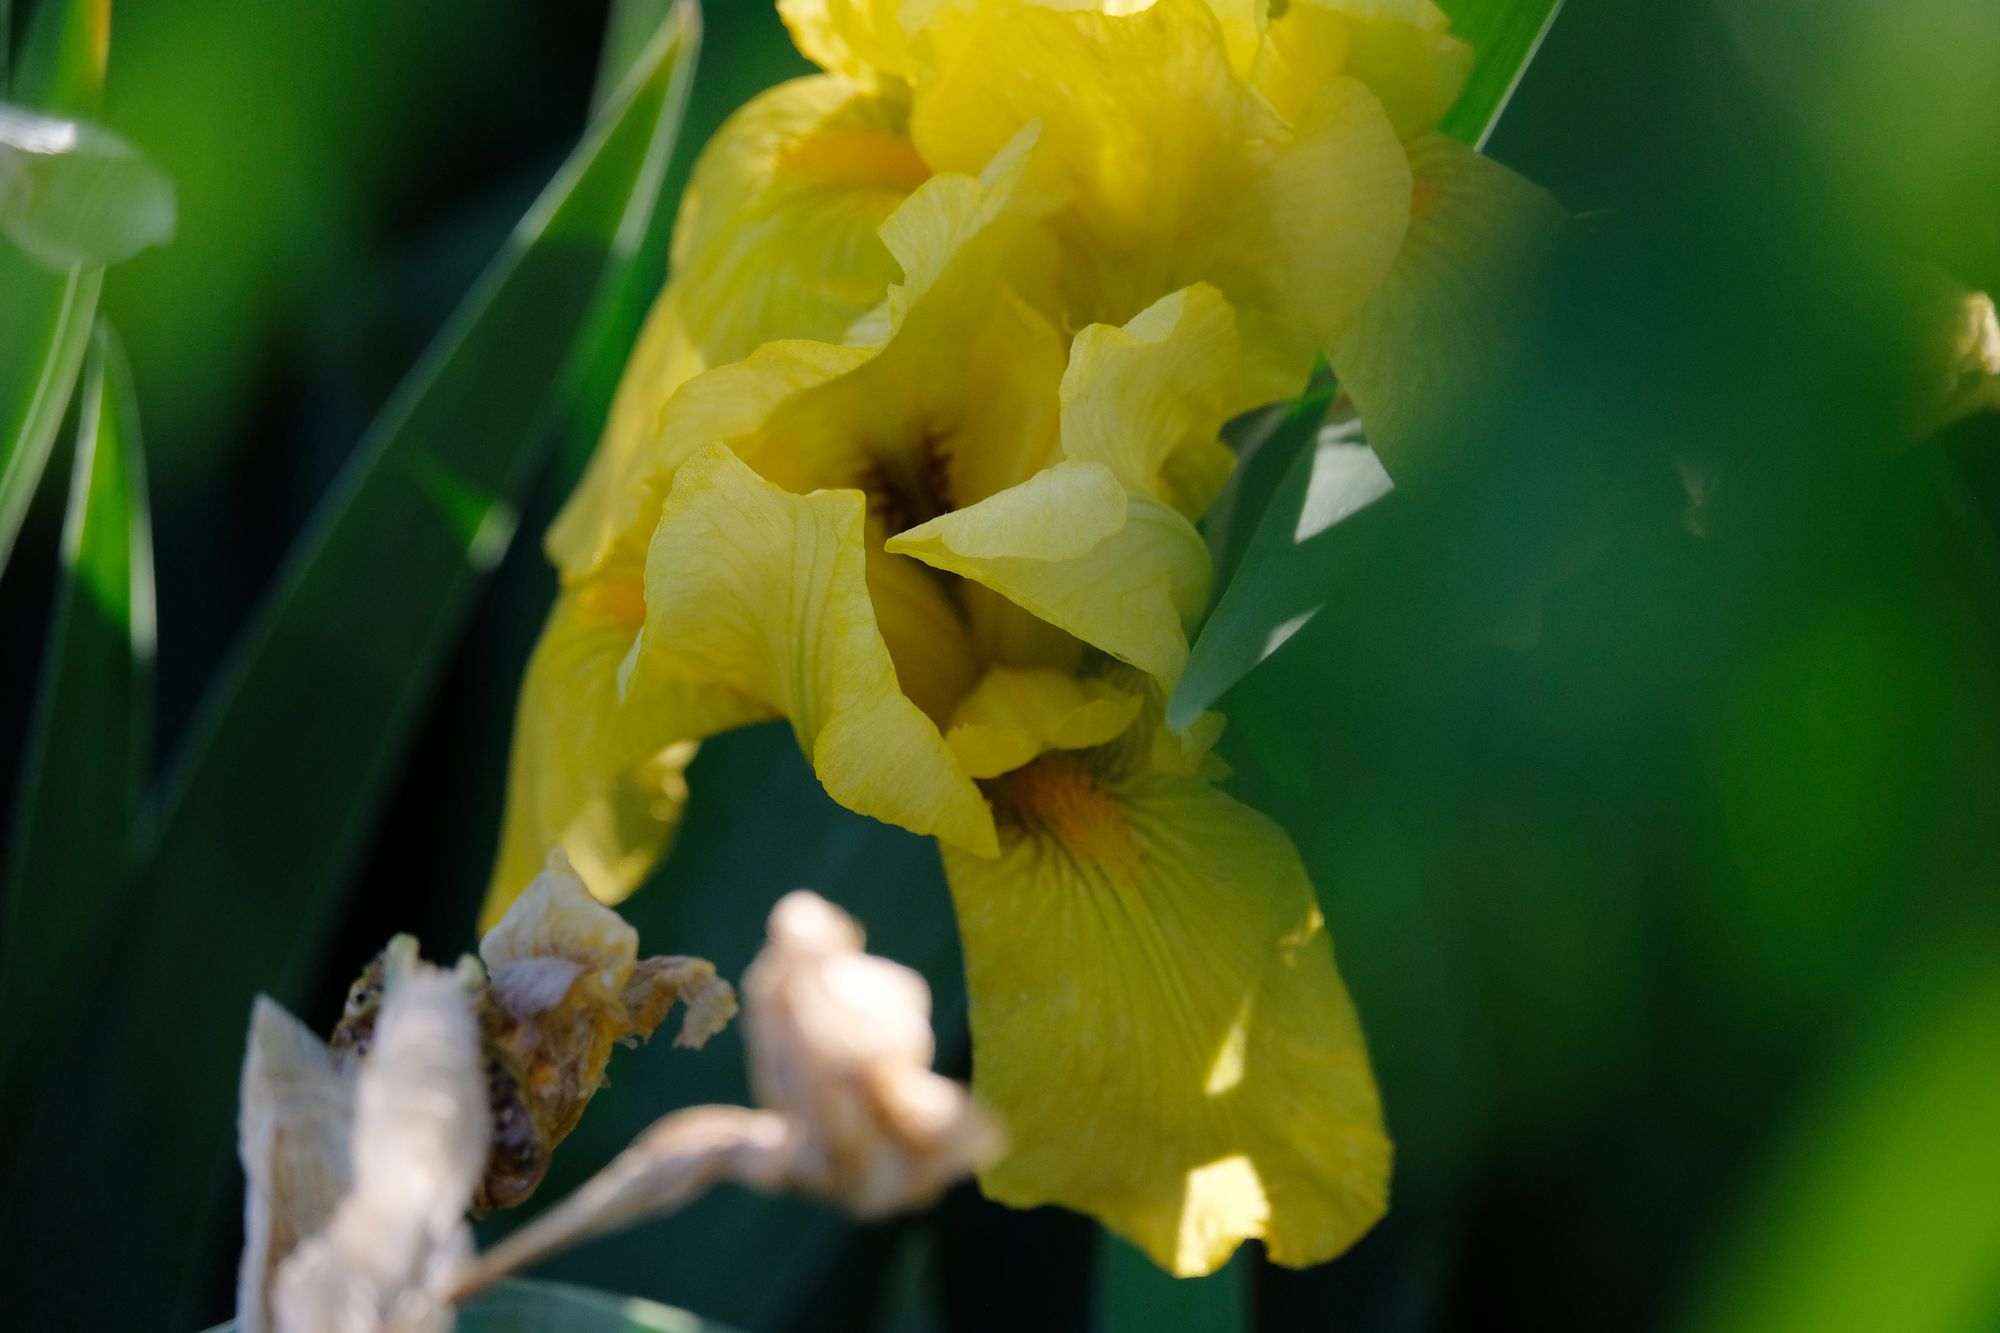 A close up image of a yellow Iris blossom and green leaves